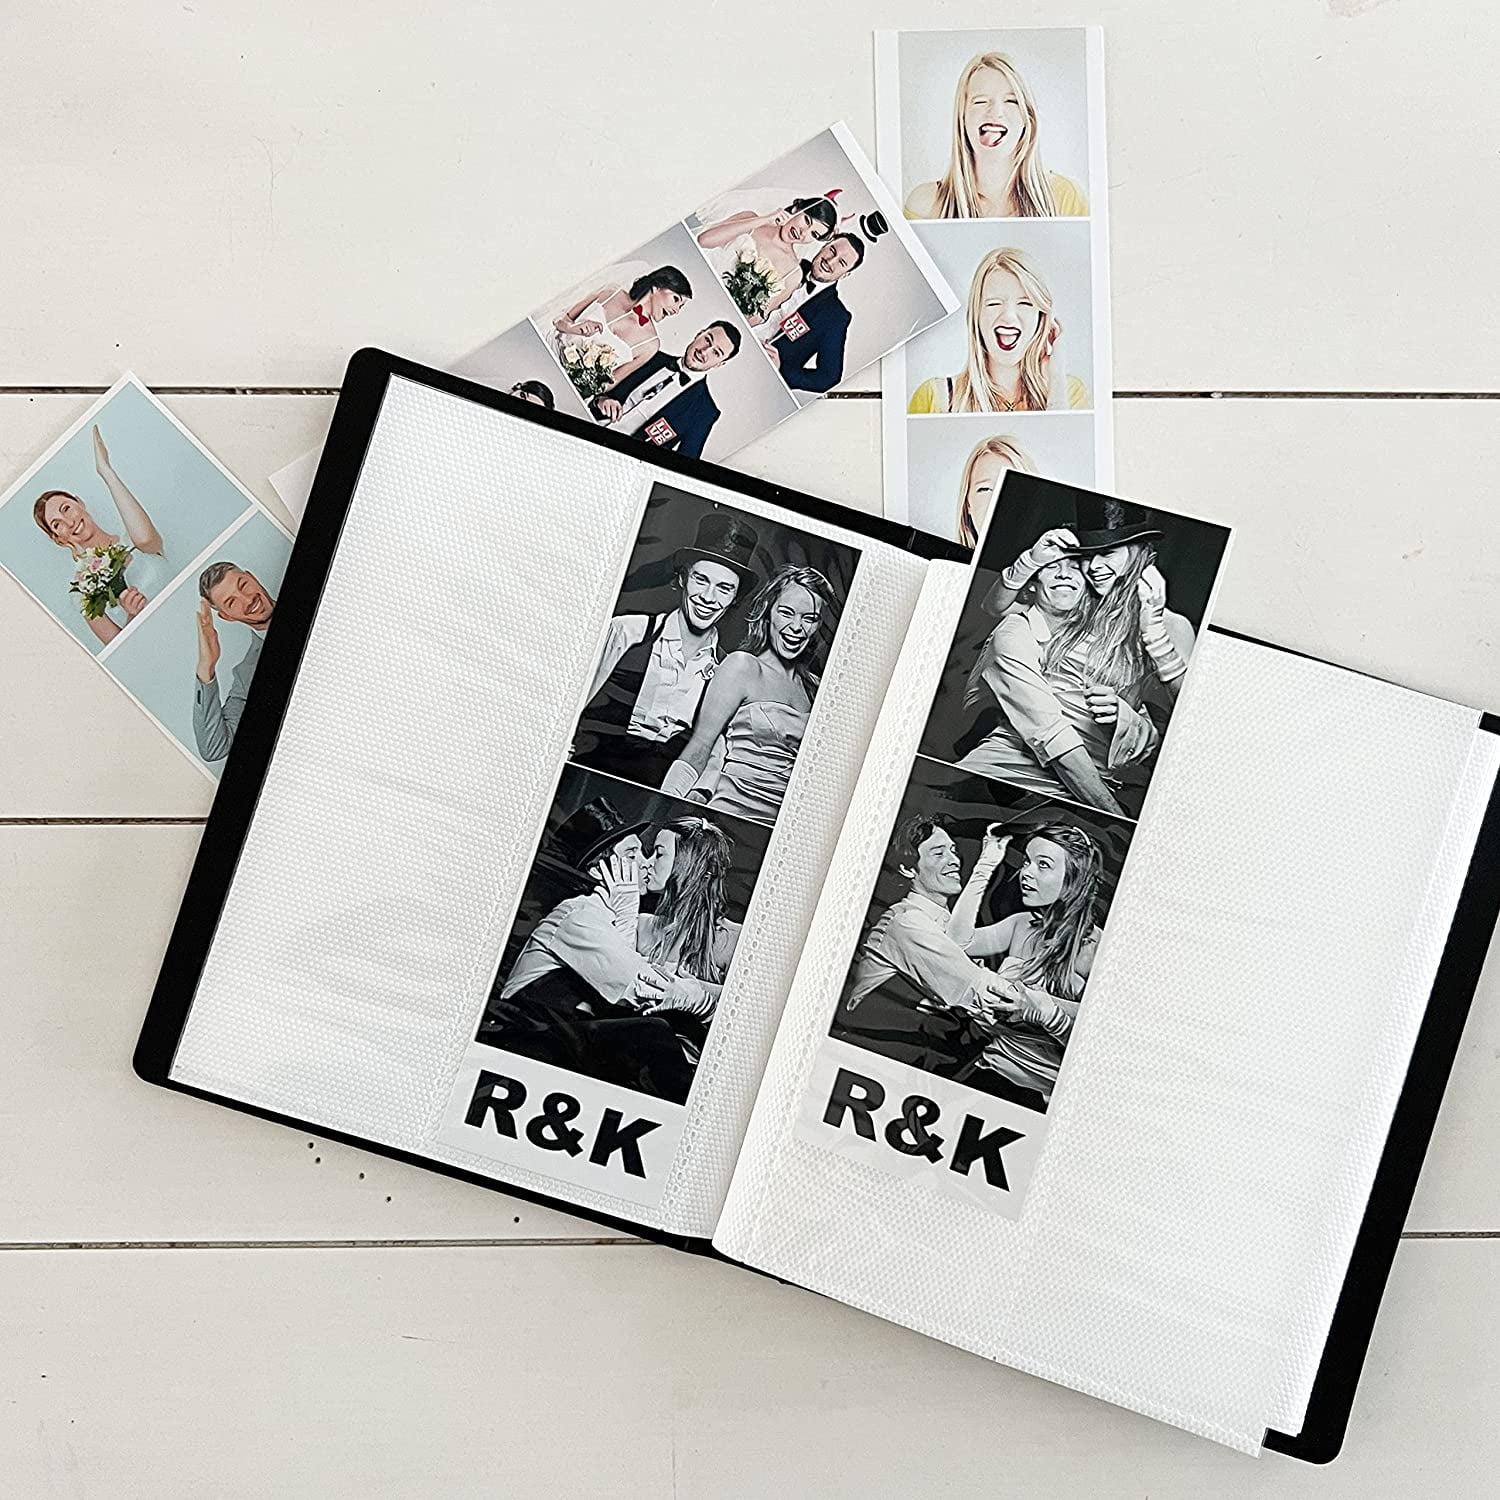 Photo Booth Frames - Black Cover Photo Booth Wedding Memory Guest Book Album  DIY Picture Scrapbook with 2x6 Inch Photo Strip Inserts - 40 Black Pages -  Picture Perfect Supply